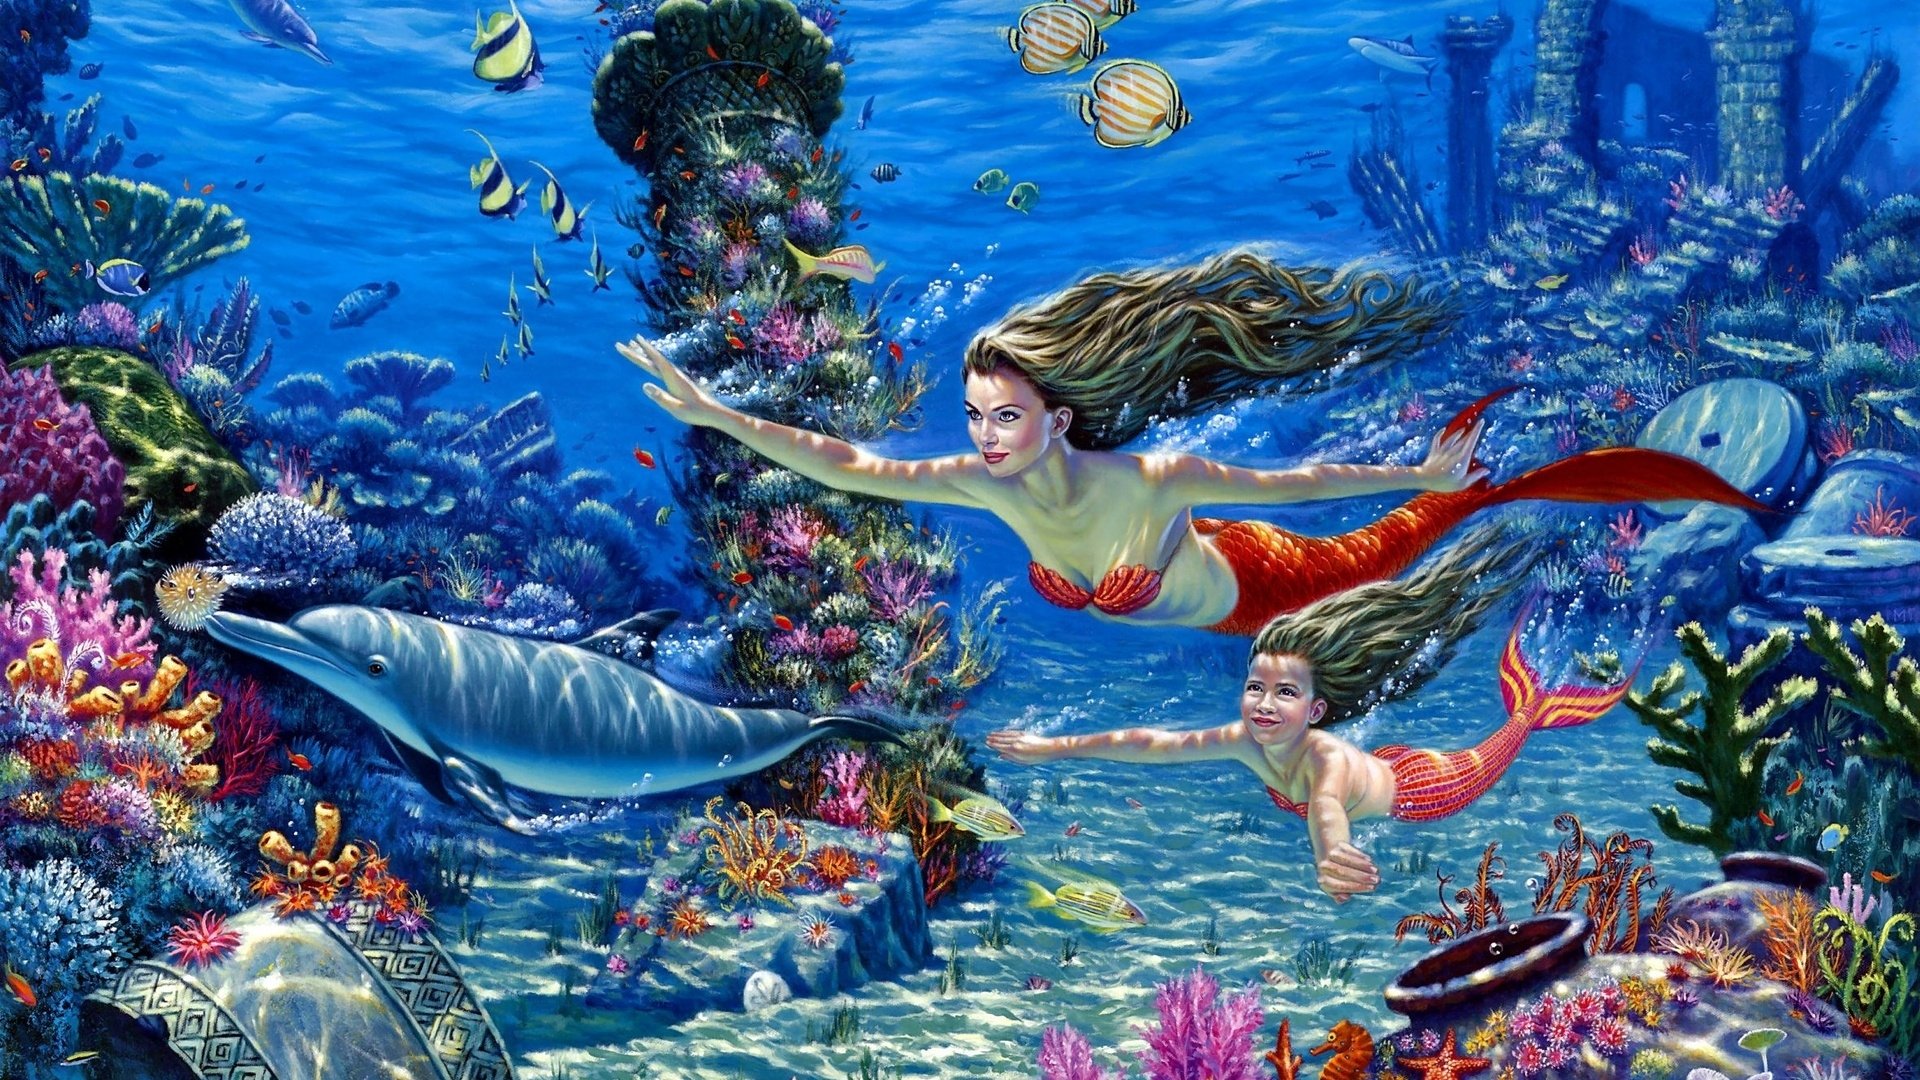 153 Mermaid Hd Wallpapers Background Images Wallpaper Abyss Images, Photos, Reviews